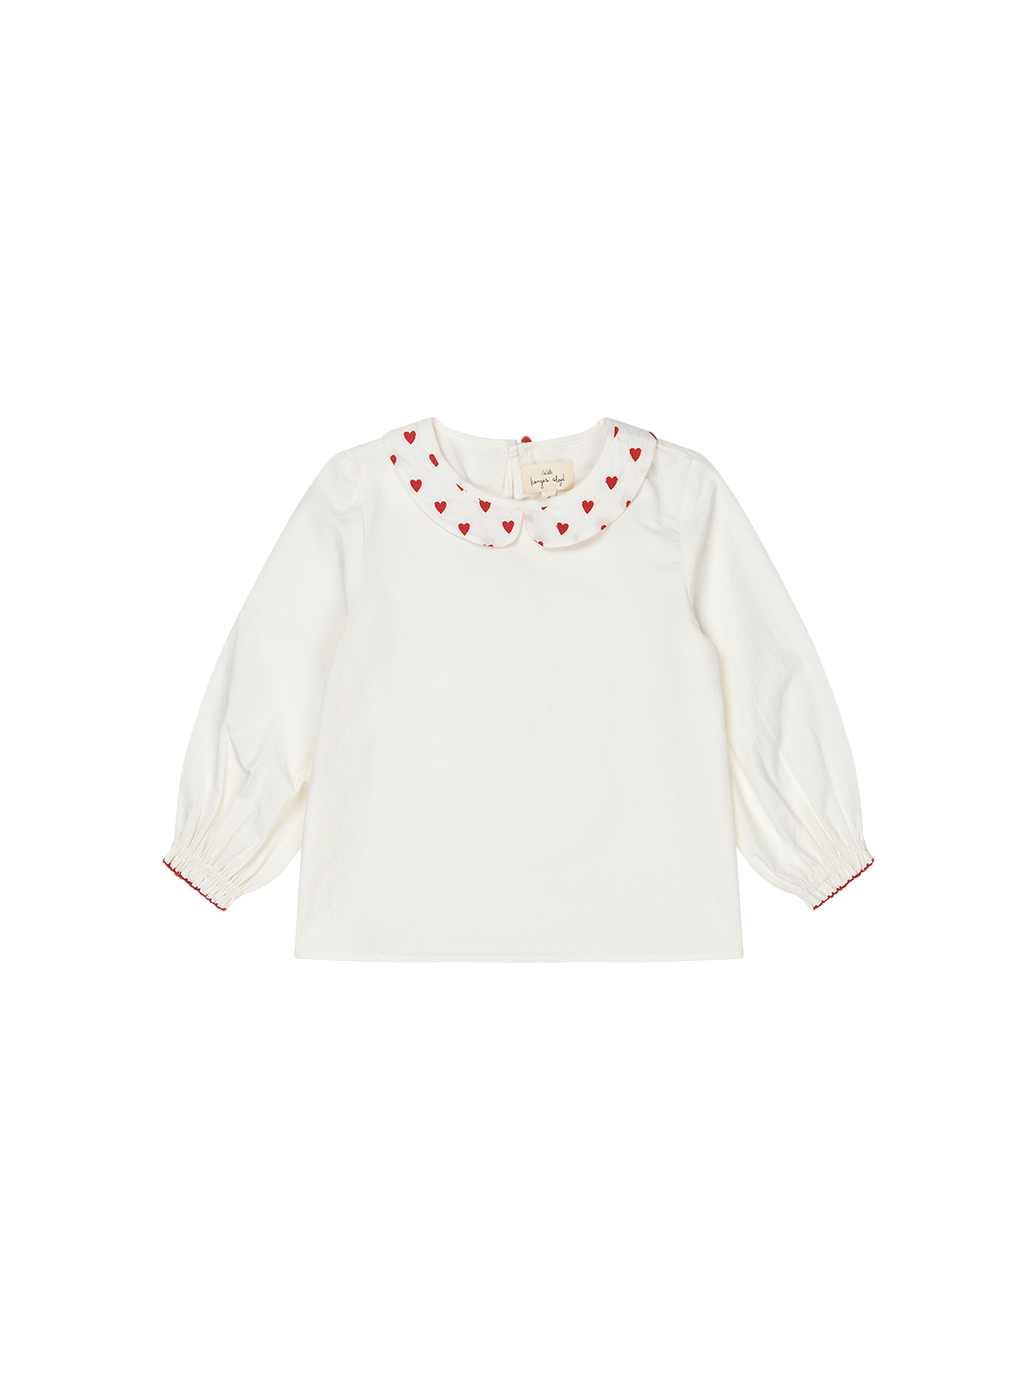 Coeur Blouse embroidered collar blouse